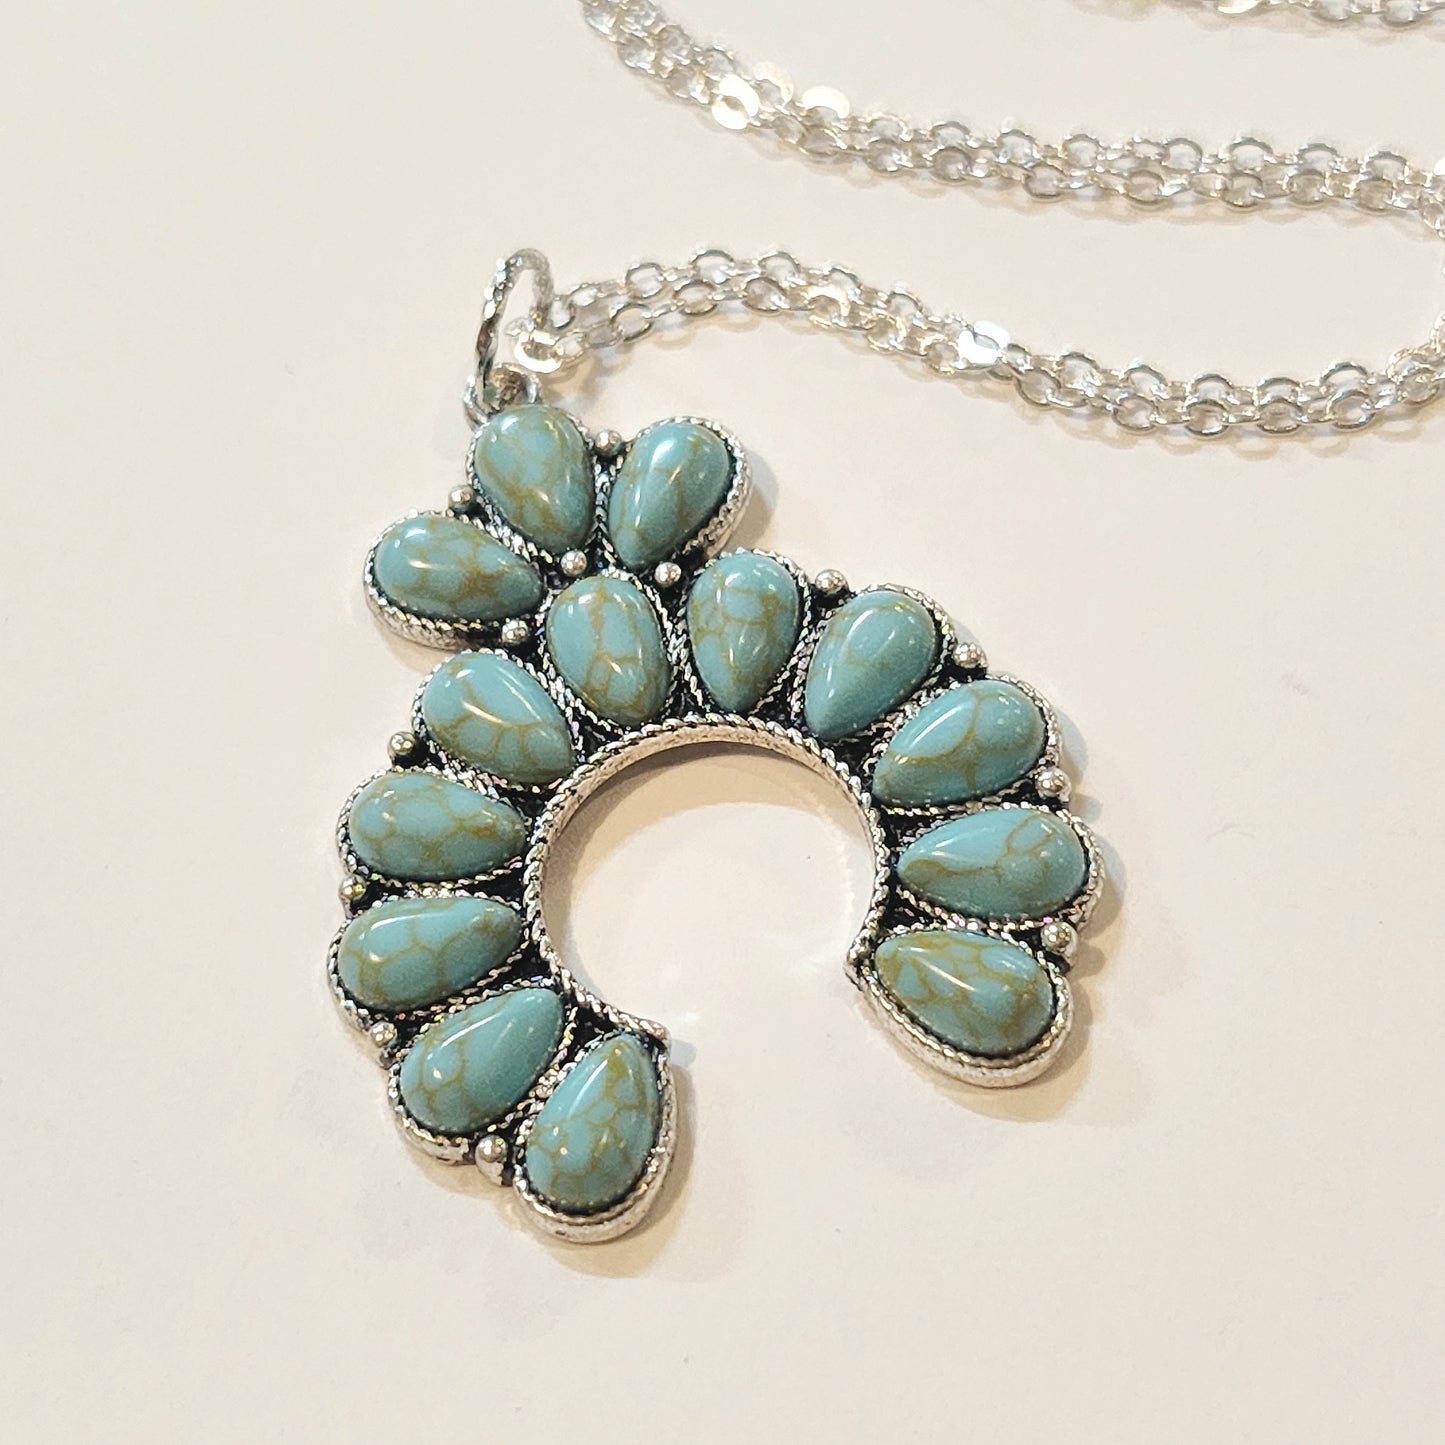 Turquoise Squash on Sterling Silver Chain